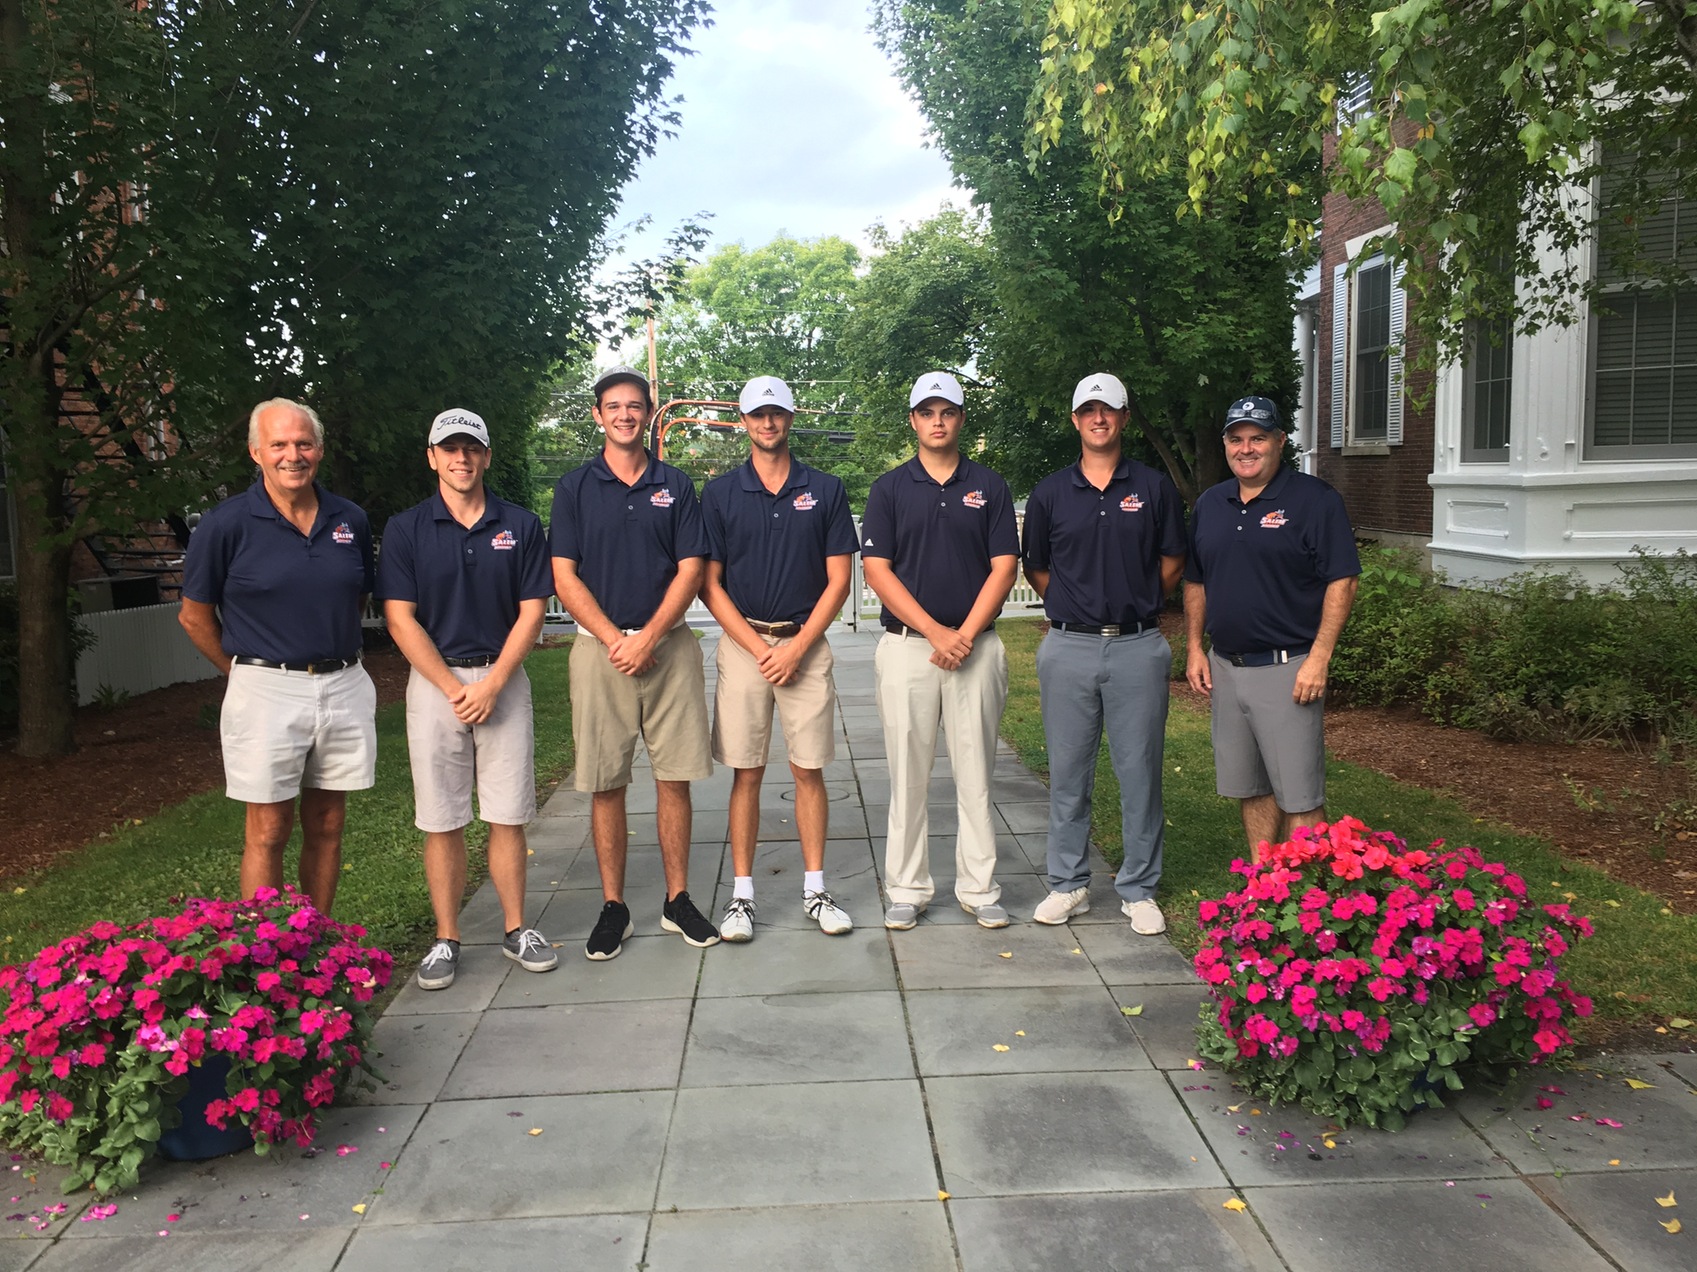 Vikings Shoot Tournament Low on Day Two of Lafrance Hospitality Invitational